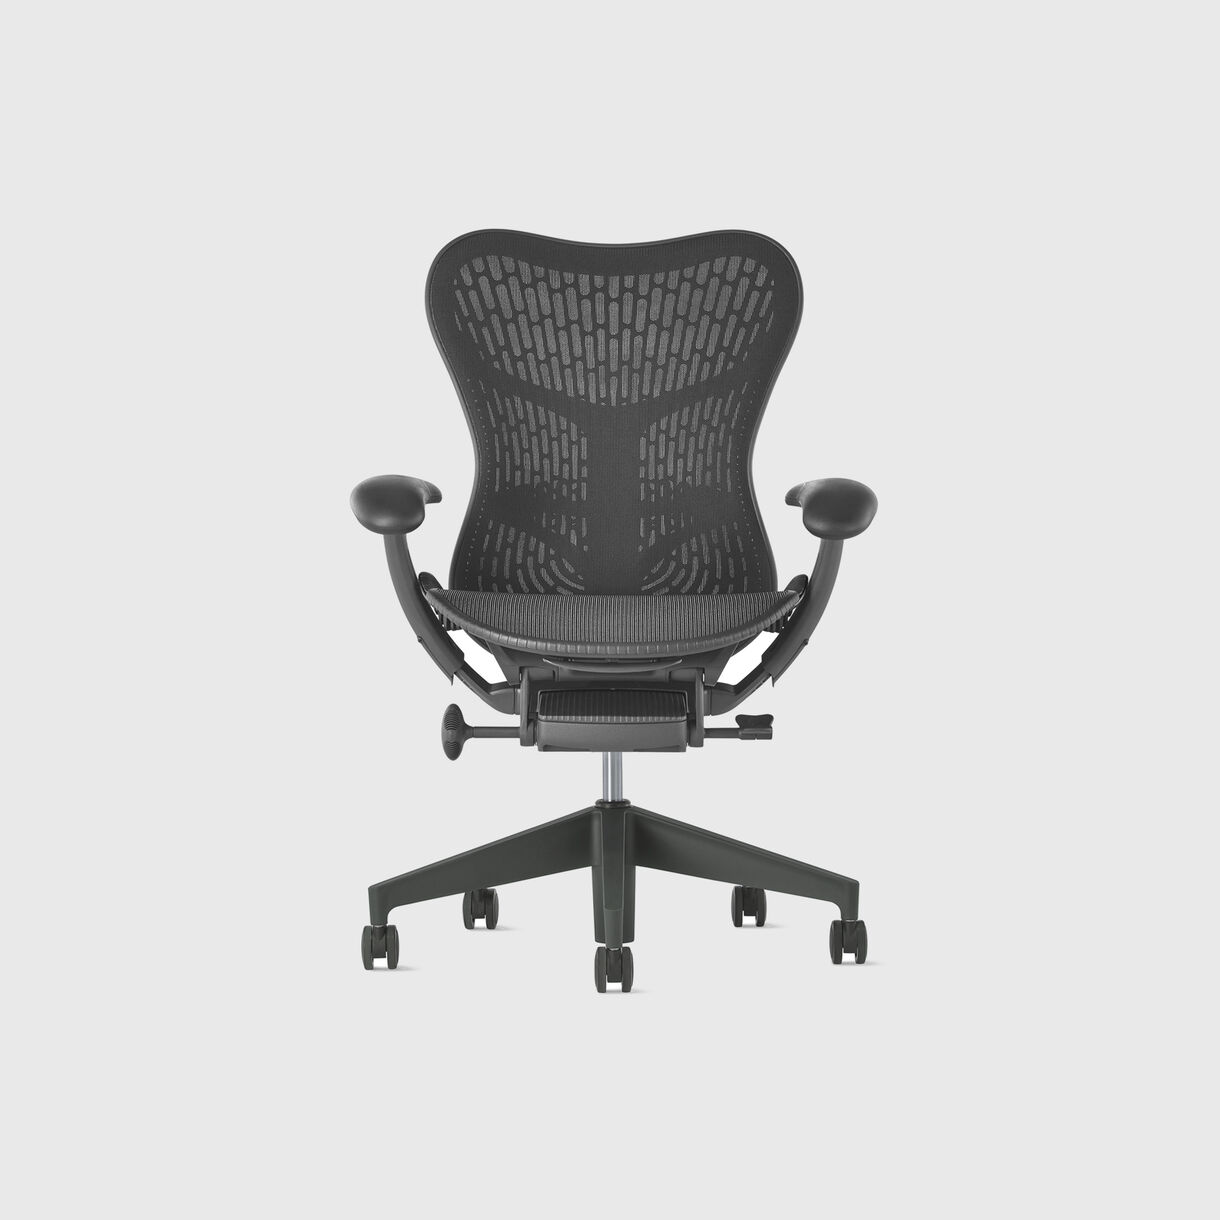 Mirra 2 Work Chair - Butterfly Suspension Graphite, Graphite Base & Frame - Adjustable Arms